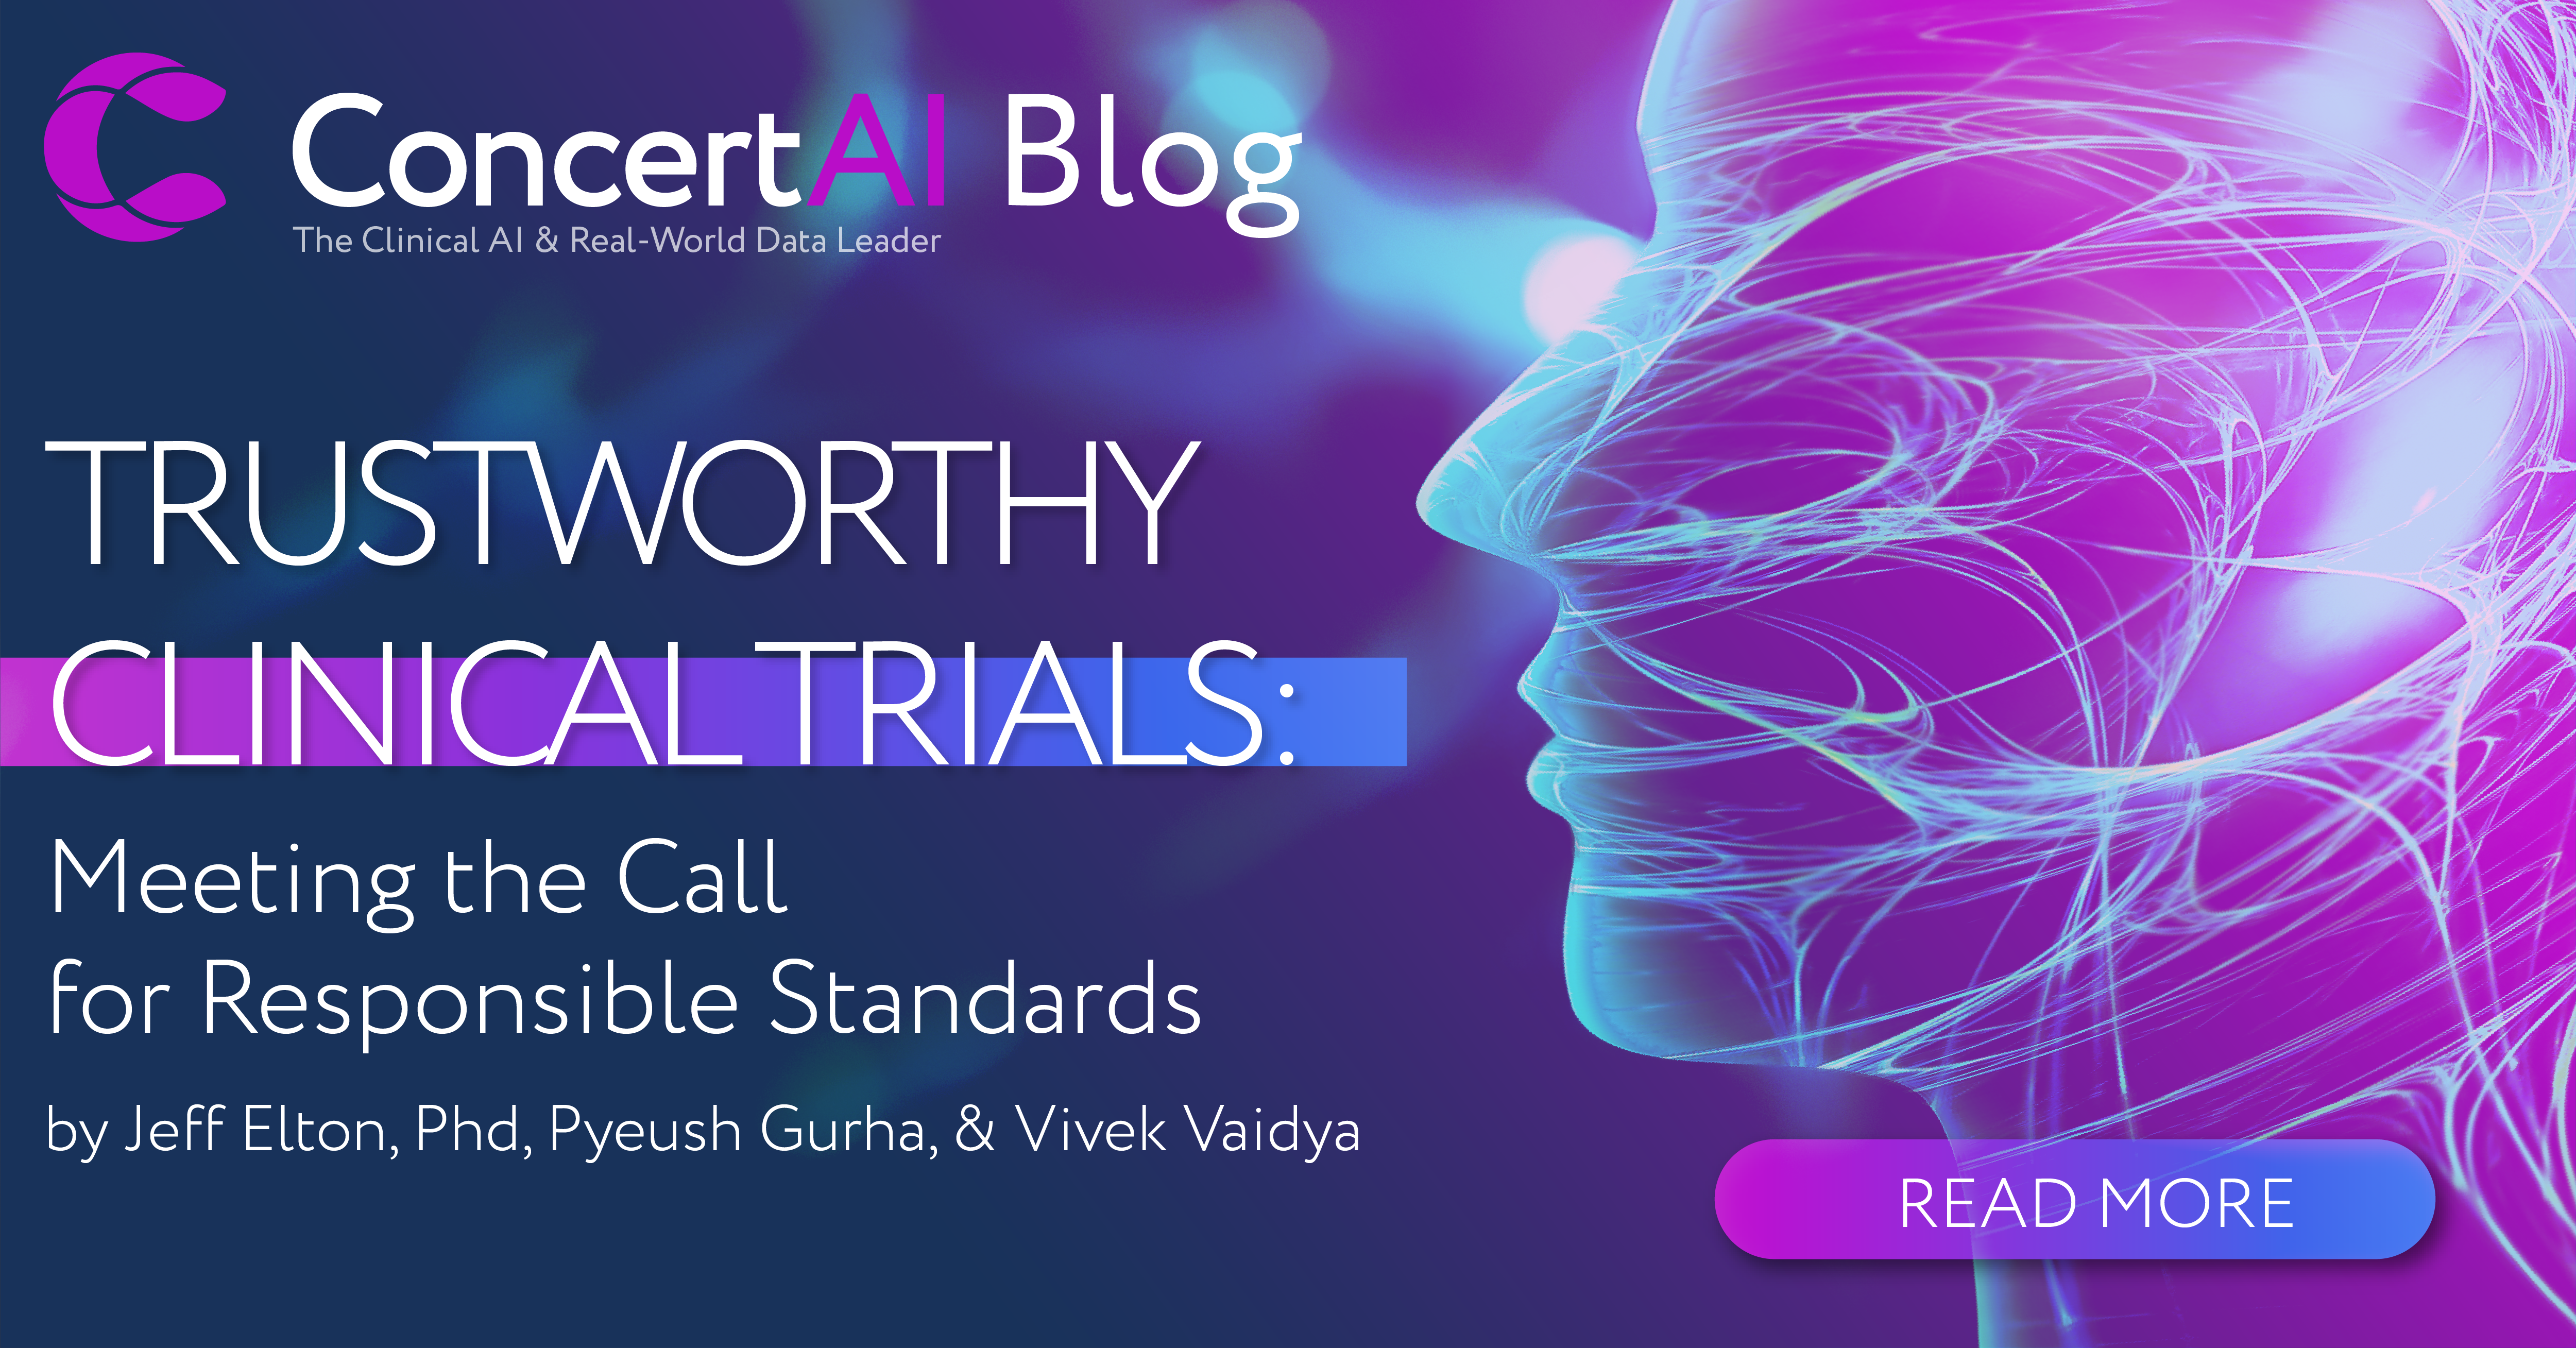 Trustworthy Clinical Trials: Meeting the Call for Responsible Standards